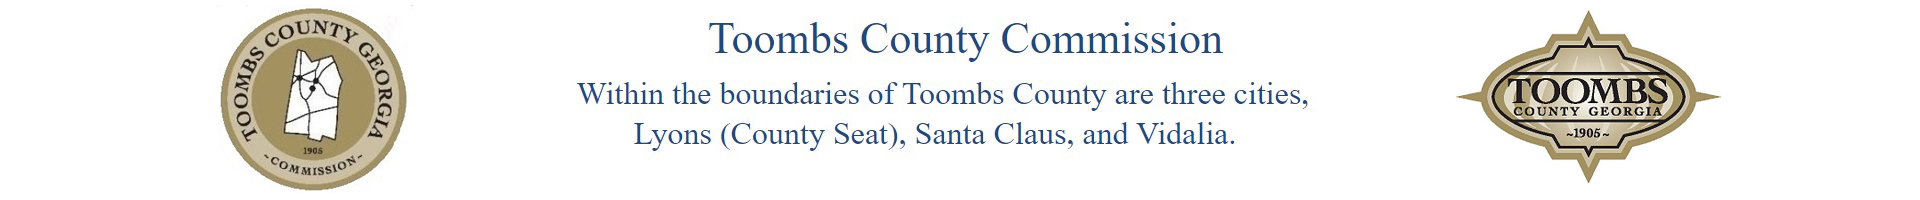 Toombs-County-Commission_Final